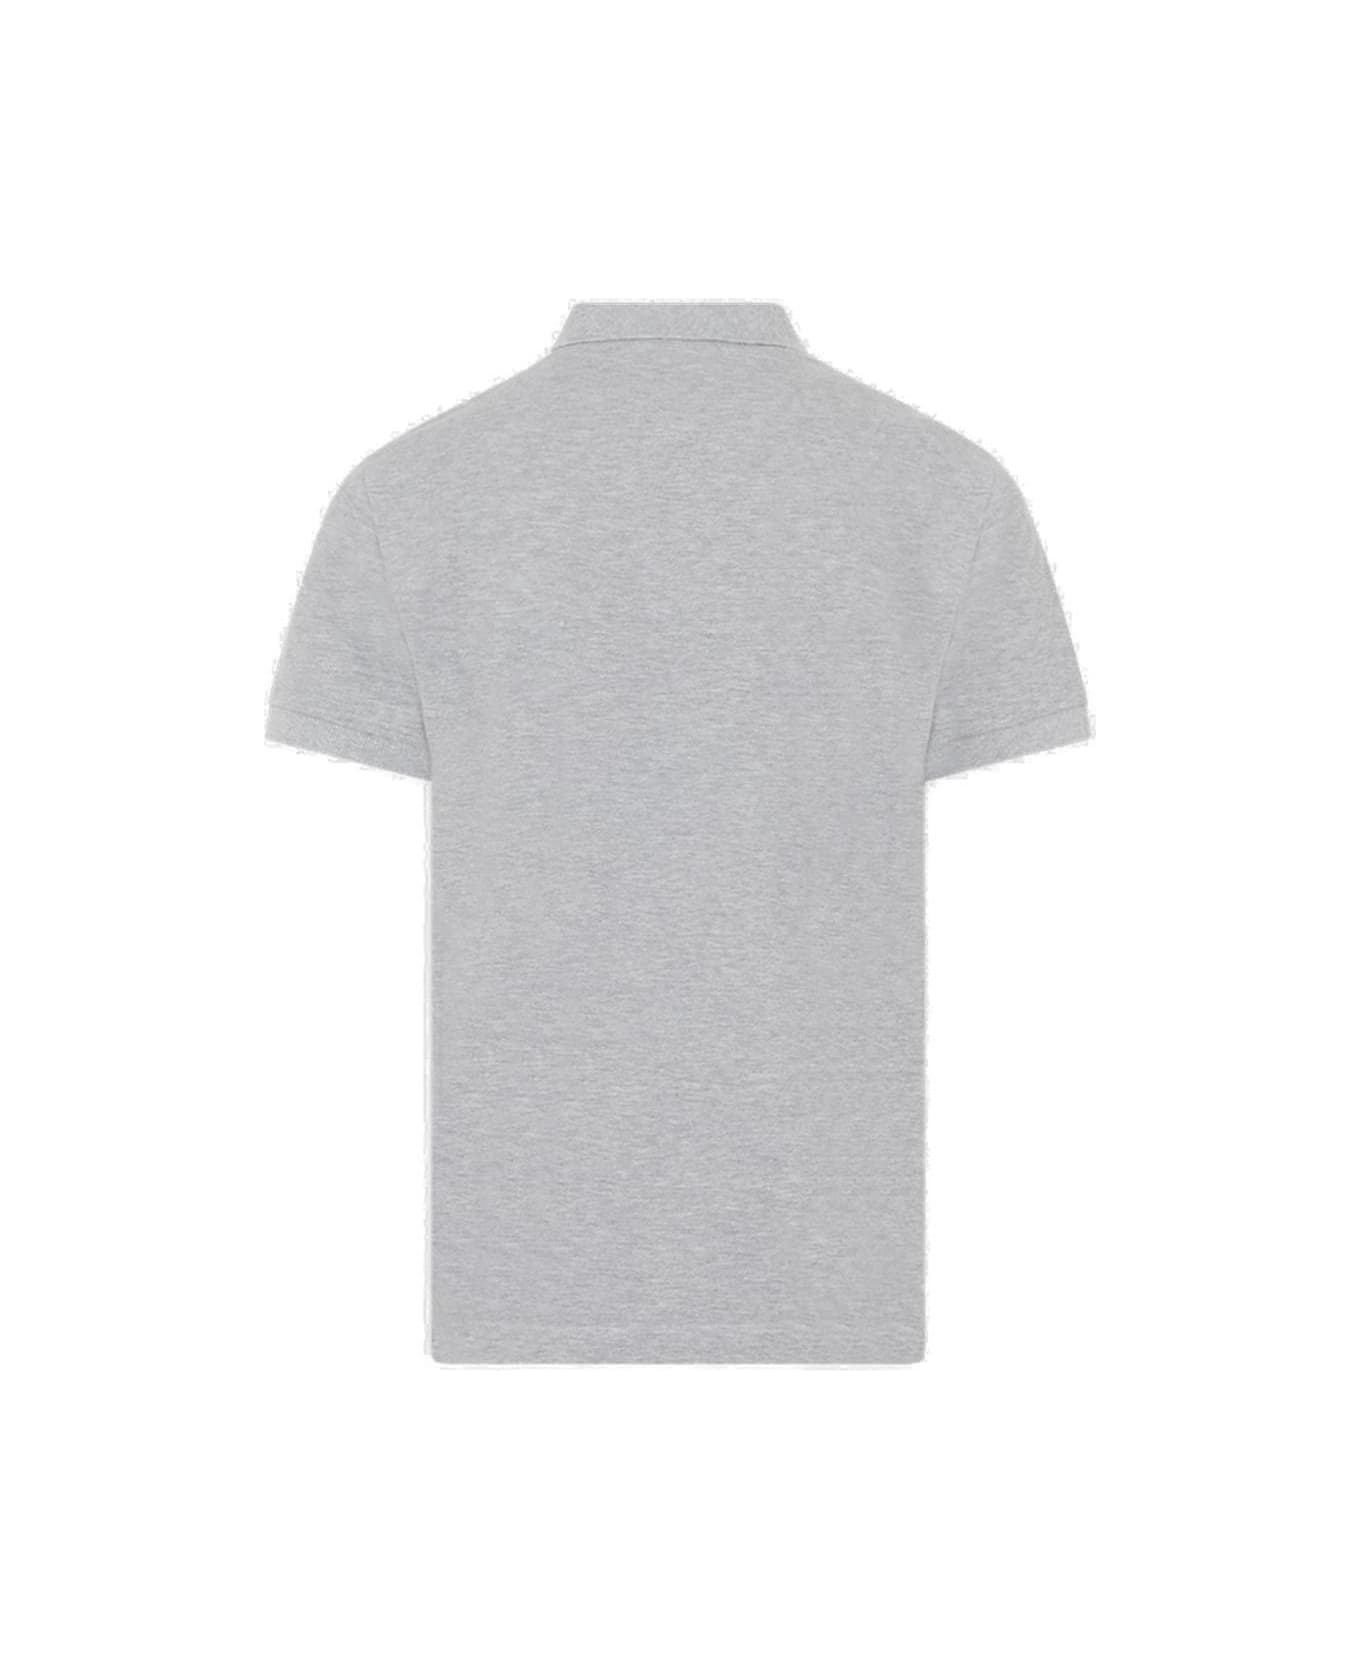 Stone Island Compass Patch Polo Shirt - Grey シャツ